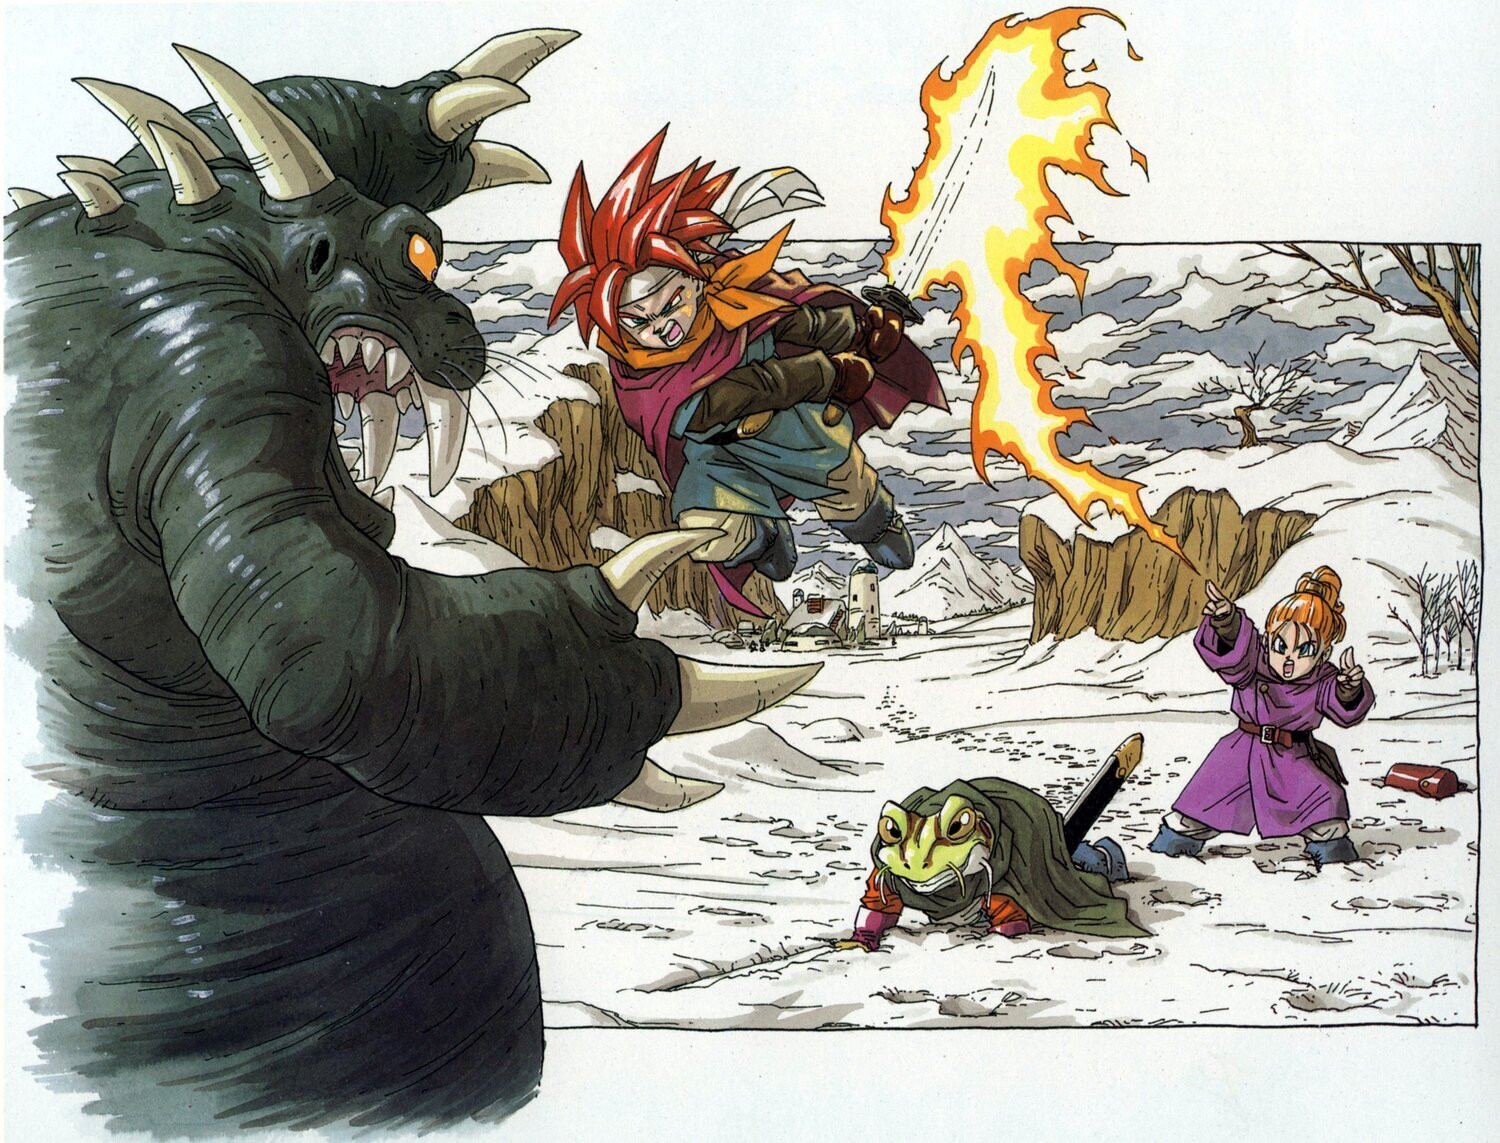 Chrono Trigger Needs To Be On Modern Consoles